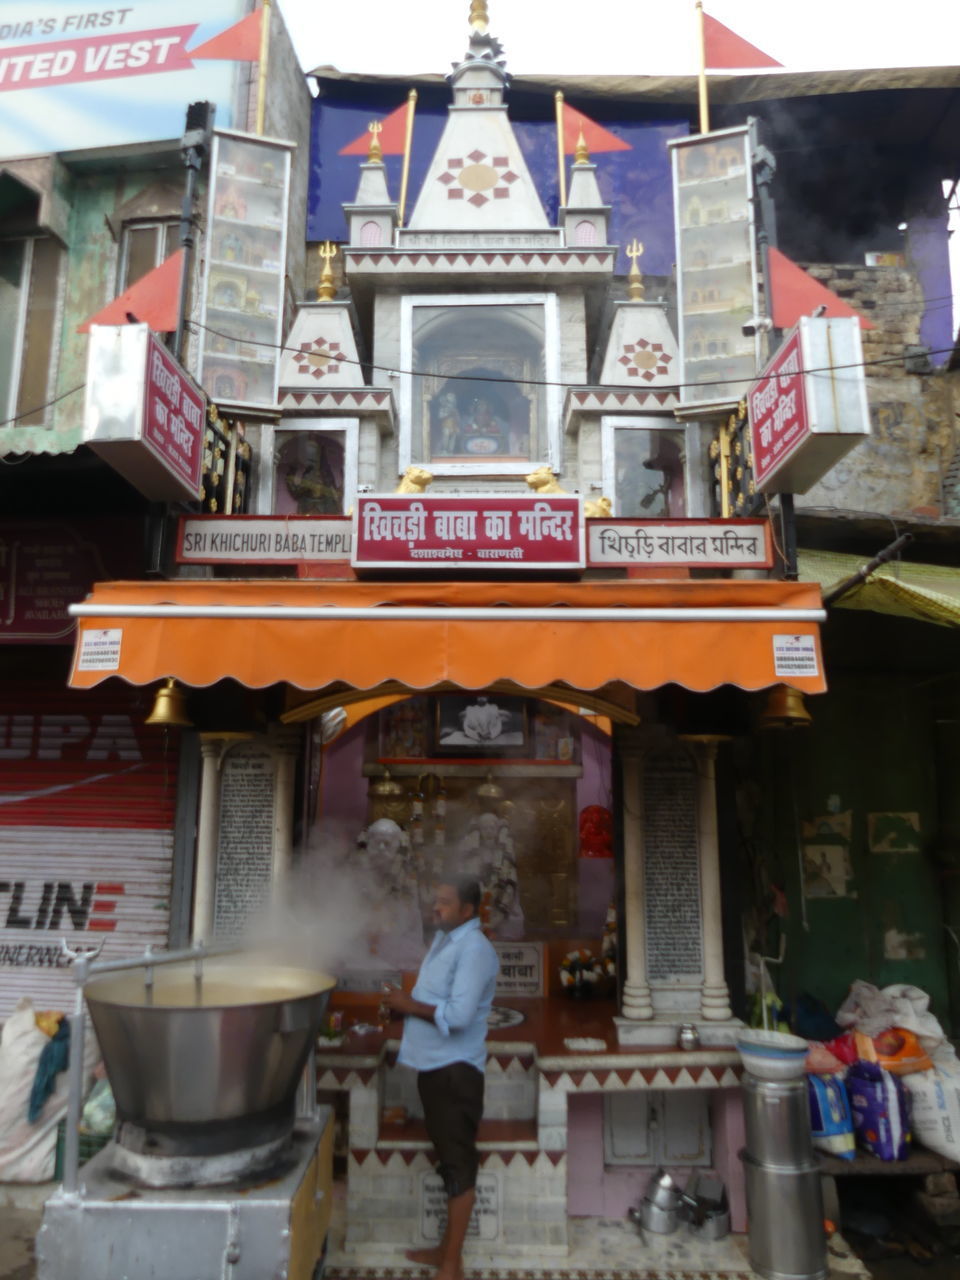 REAR VIEW OF A TEMPLE